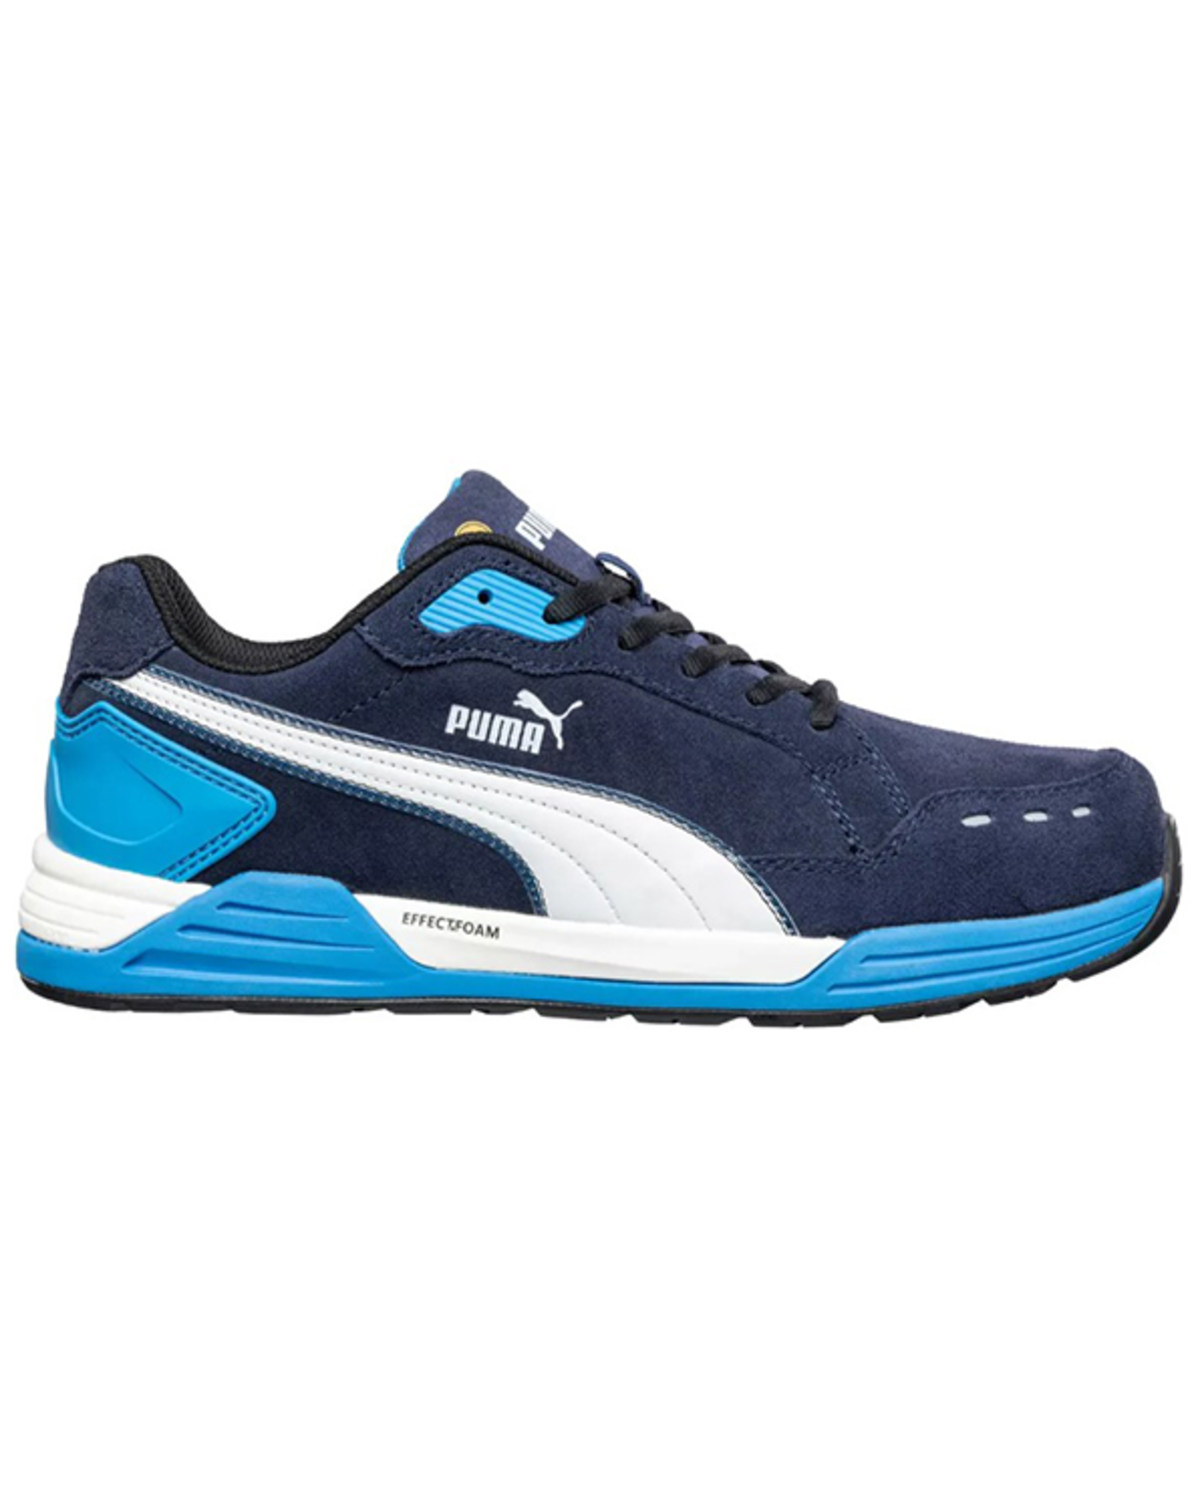 Puma Safety Men's Airtwist Work Shoes - Soft Toe